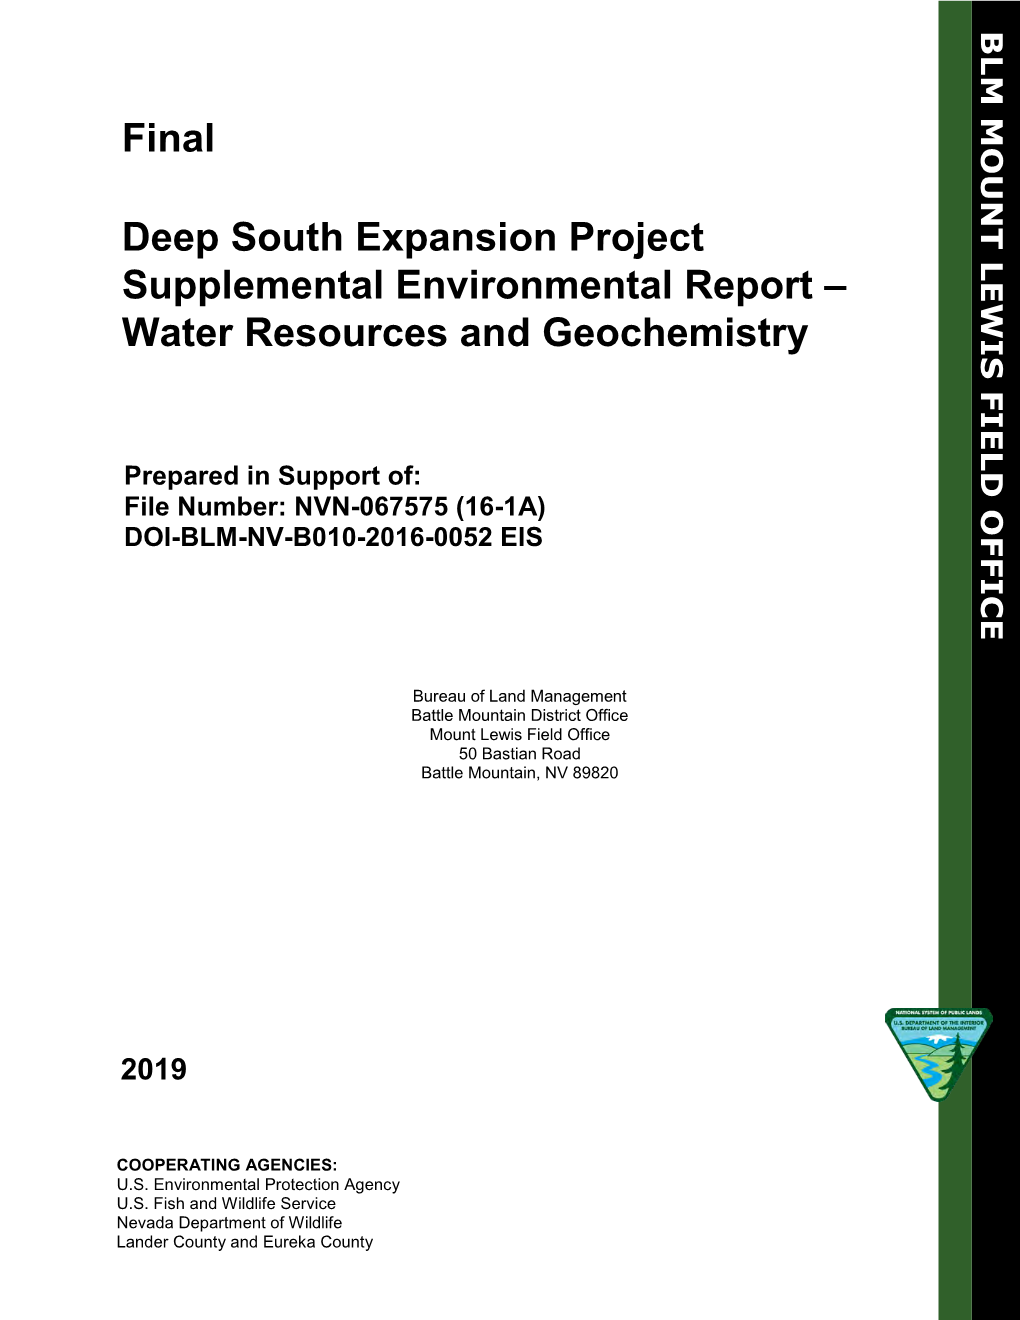 Deep South Expansion Project Final Supplemental Environmental